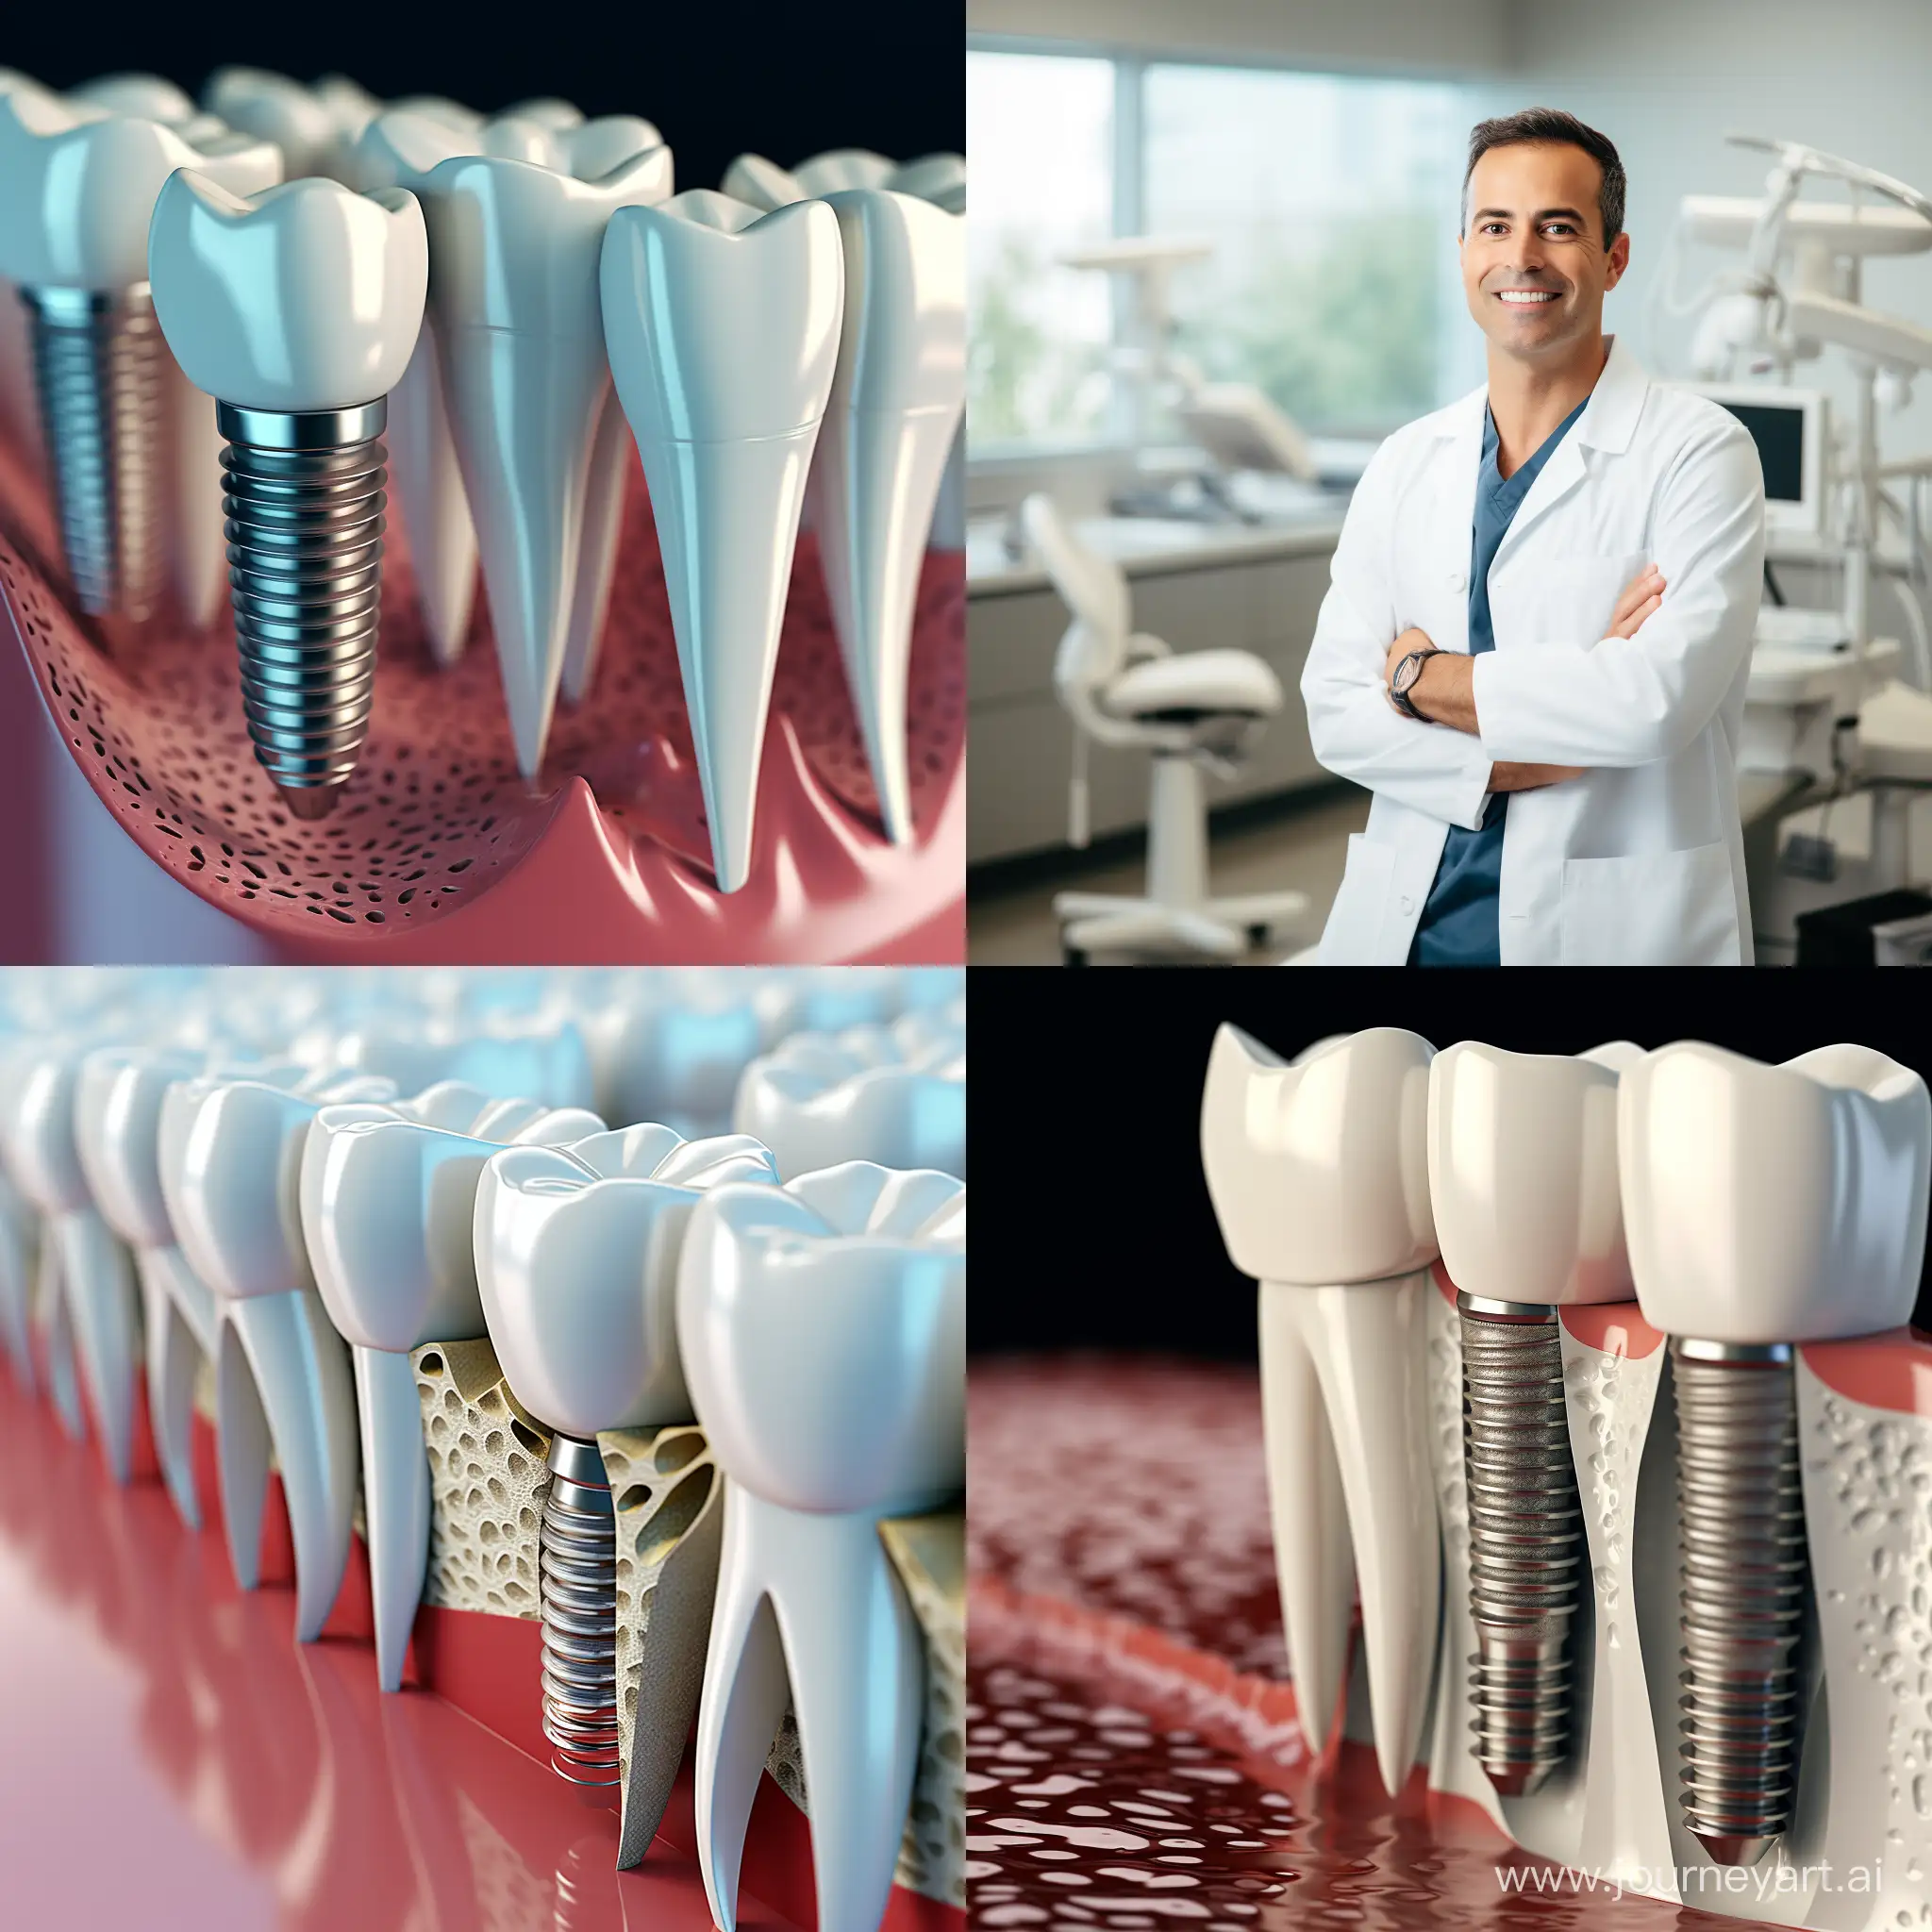 Thoughtful-Dental-Implants-in-Dentistry